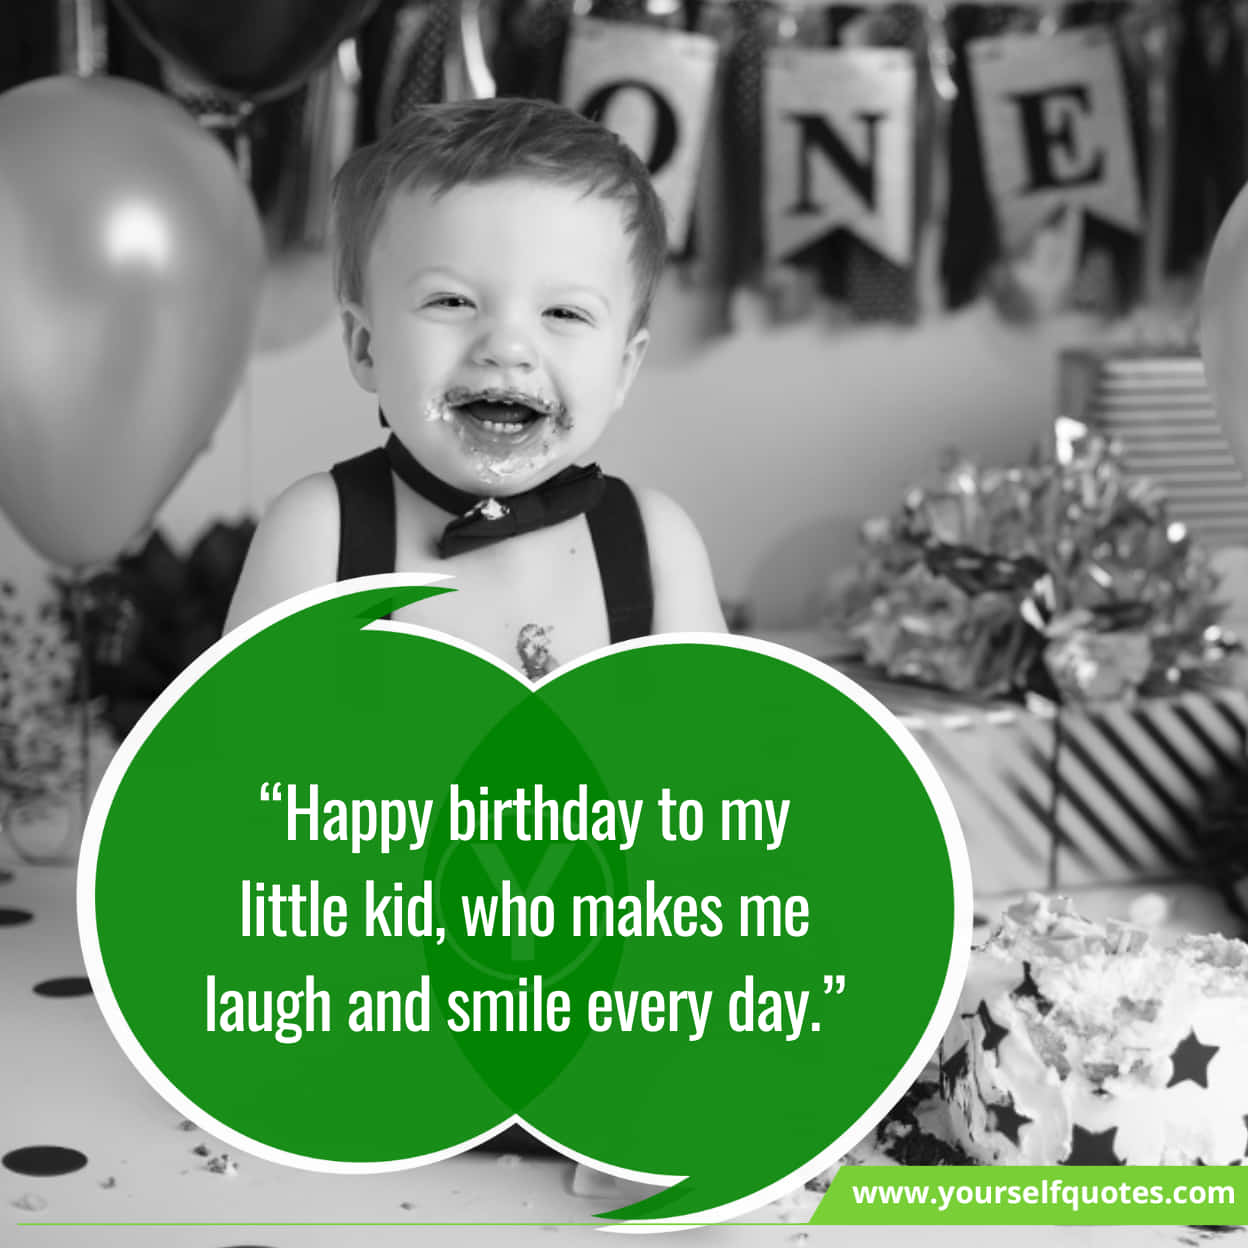 Happy Birthday Wishes For Kids To Make Them Feel Joyous